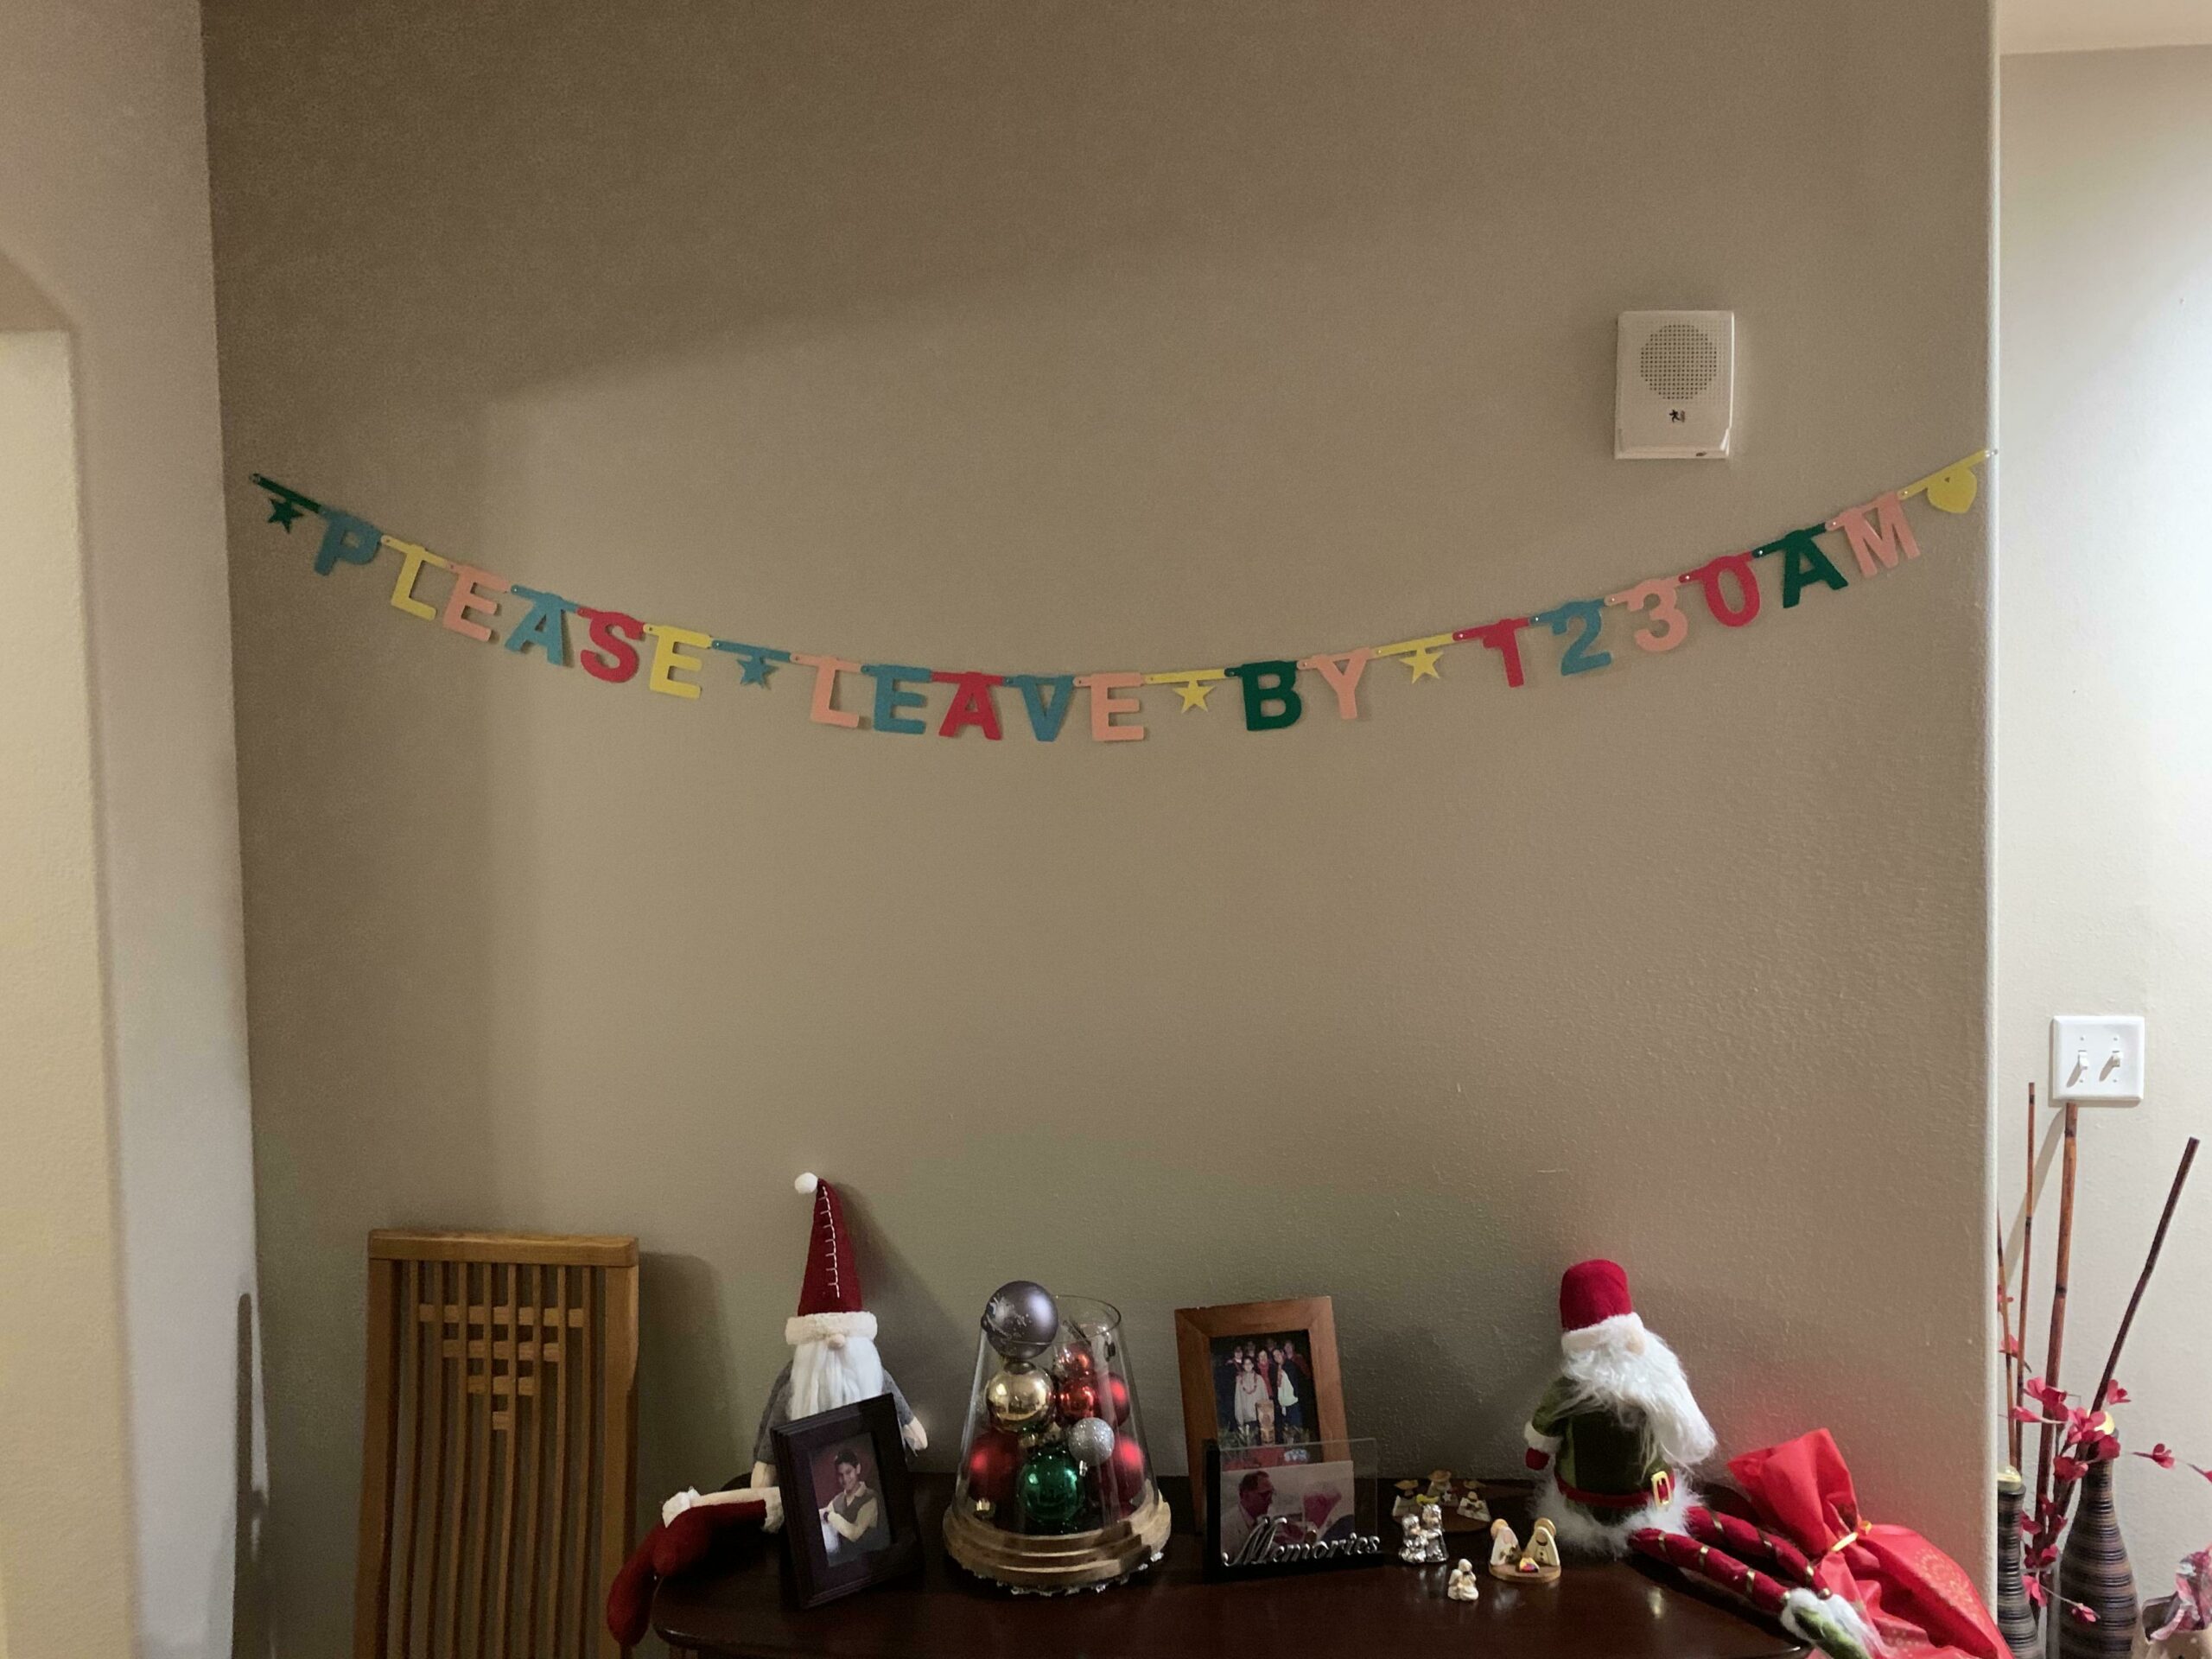 Mom Asked Me To Decorate For Our NYE Party